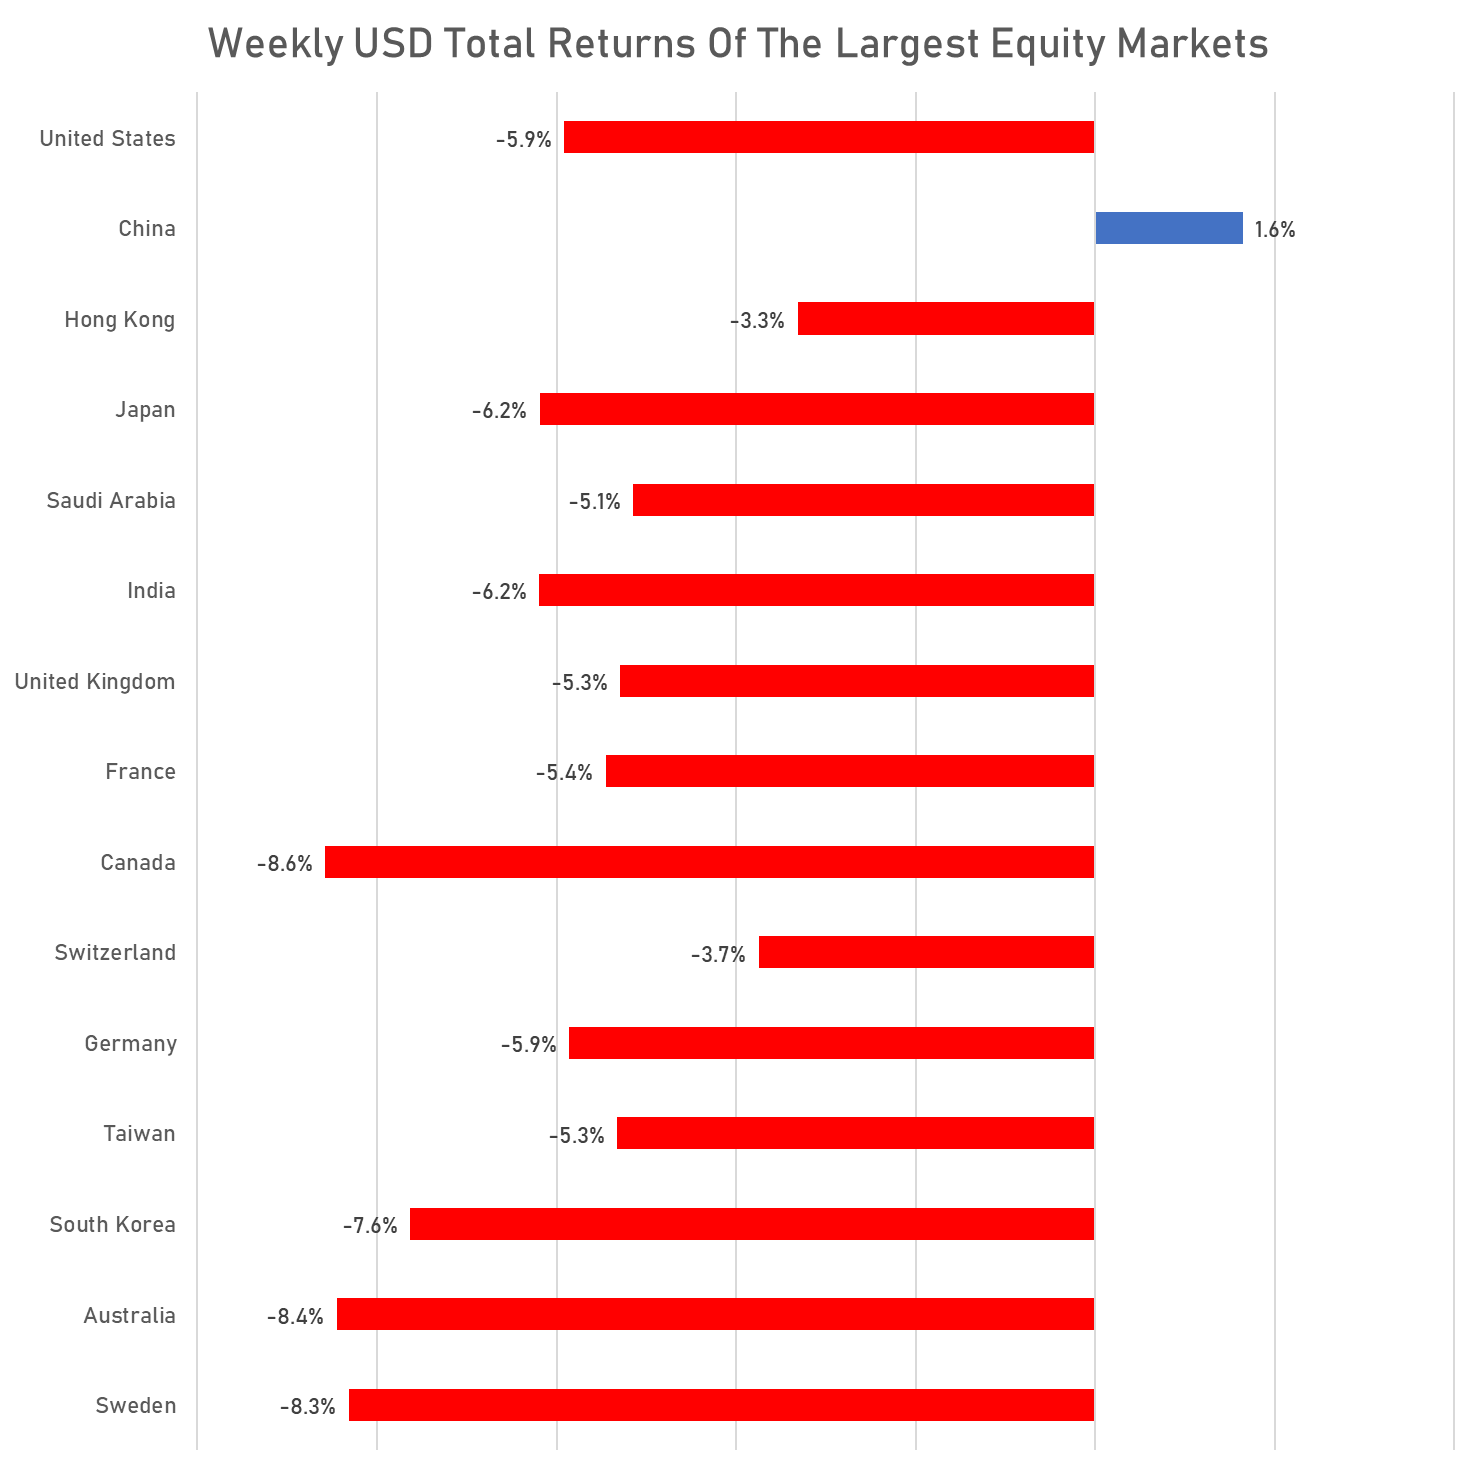 Weekly USD Total Returns Of the largest equity markets | Sources: phipost.com, FactSet data